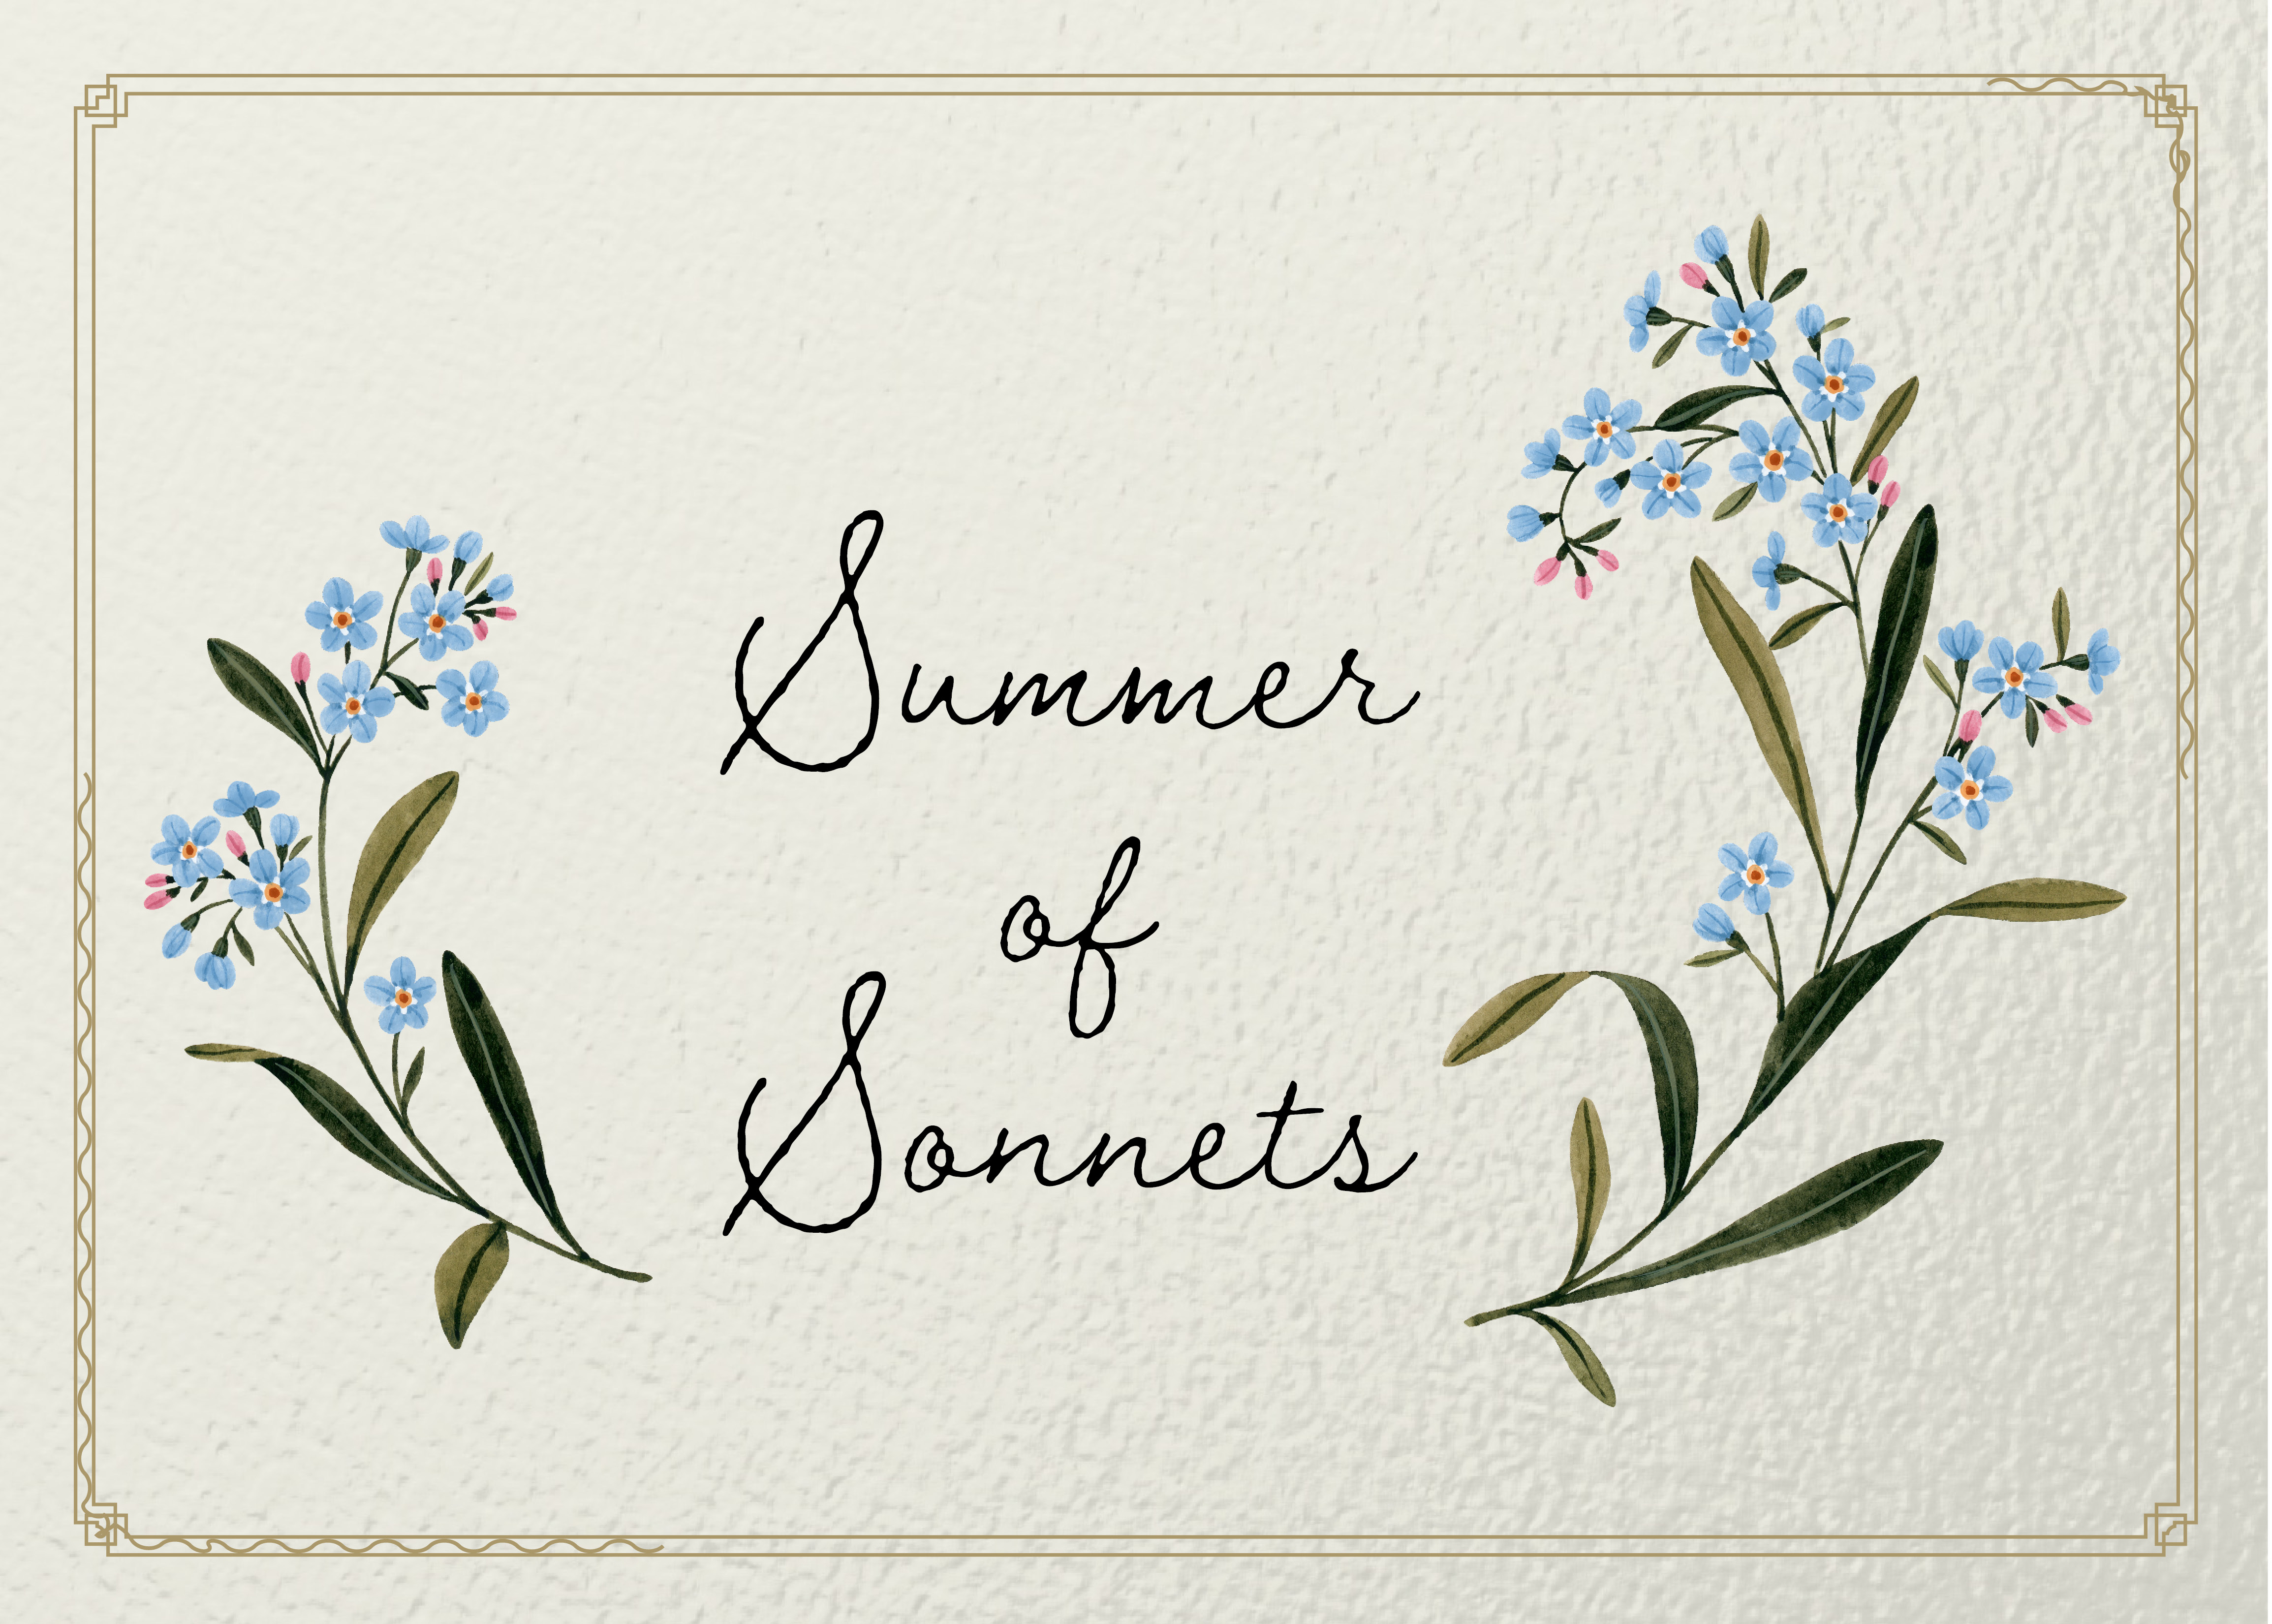 Summer of Sonnets Poster 2021